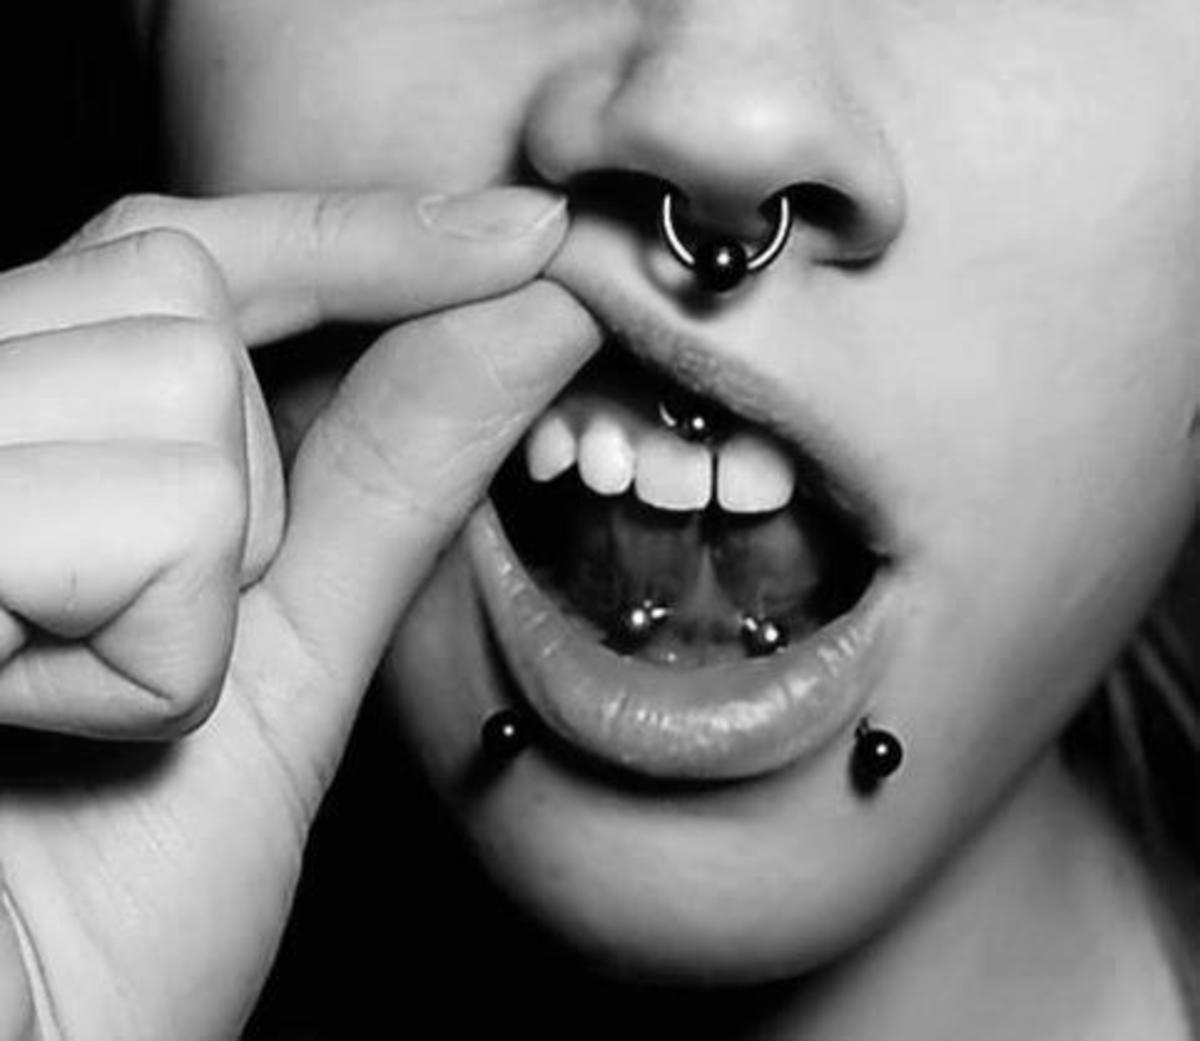 Count how many different types of piercings this person has just from nose to jaw.